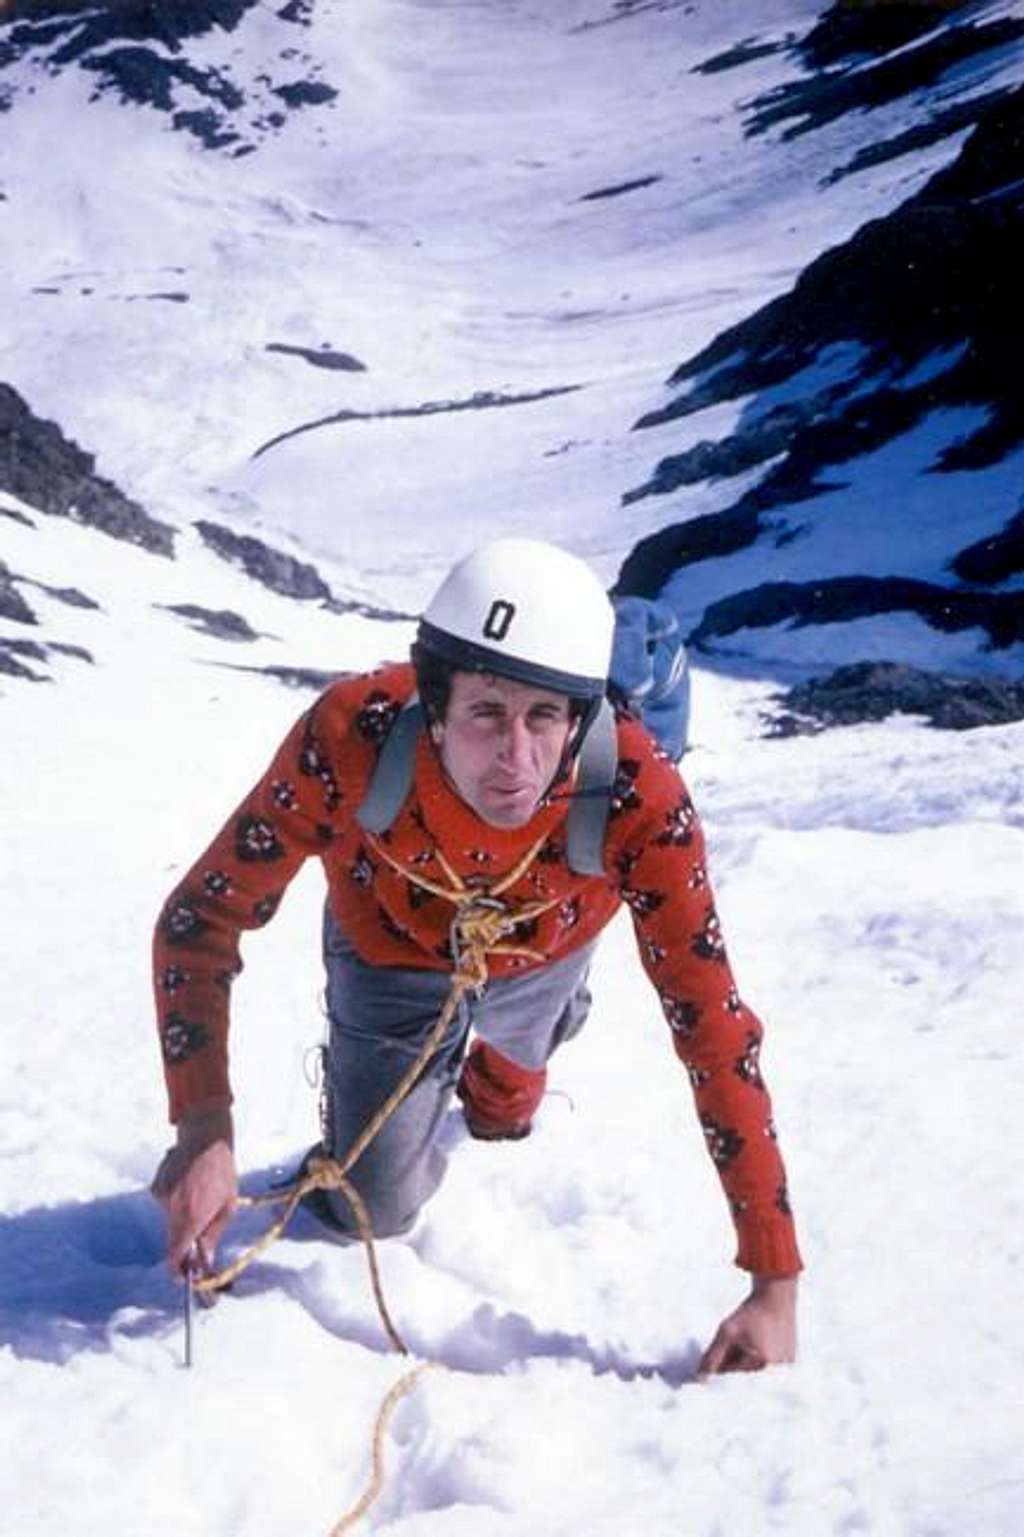 Osvaldo Cardellina on the Northern Wall of Monte Paramont <i>(3301m)</i>